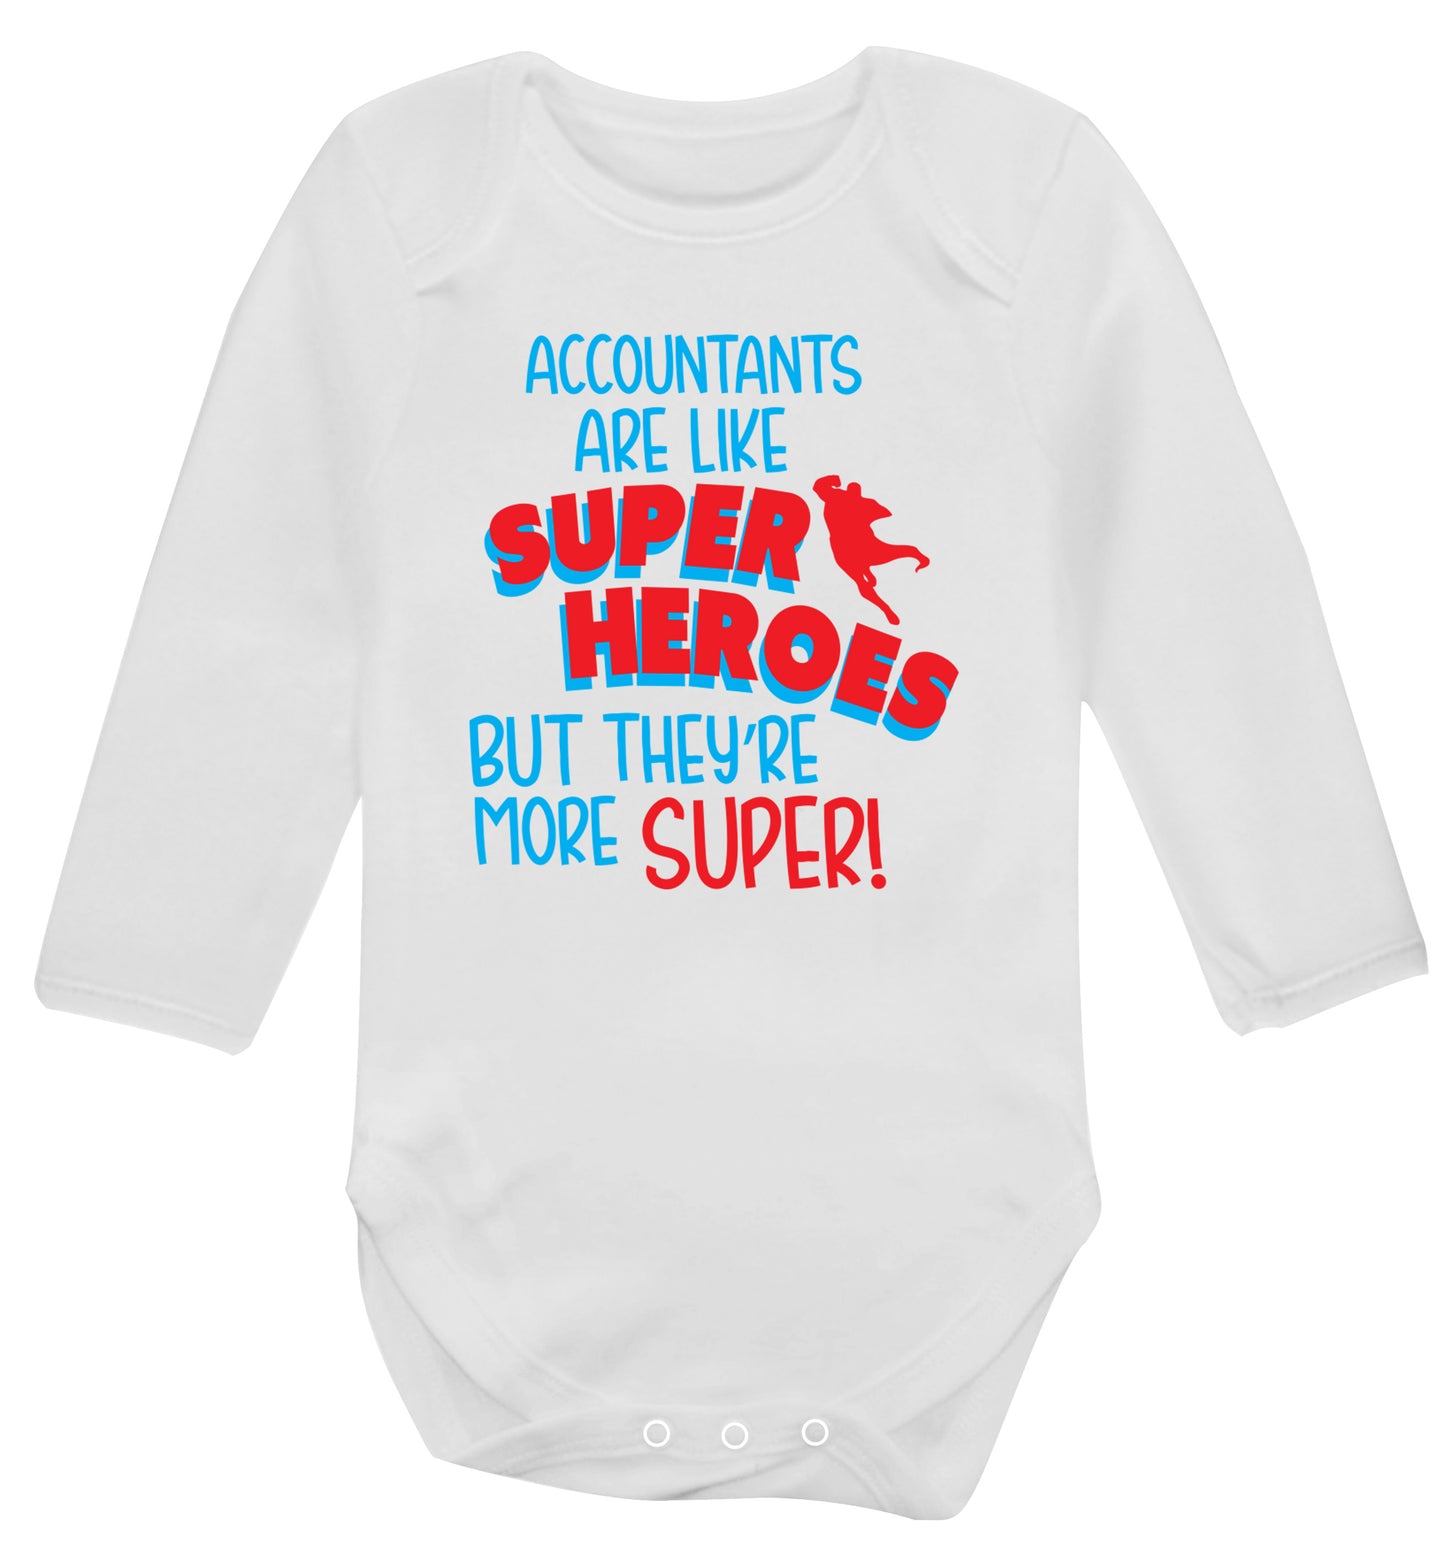 Accountants are like superheroes but they're more super Baby Vest long sleeved white 6-12 months